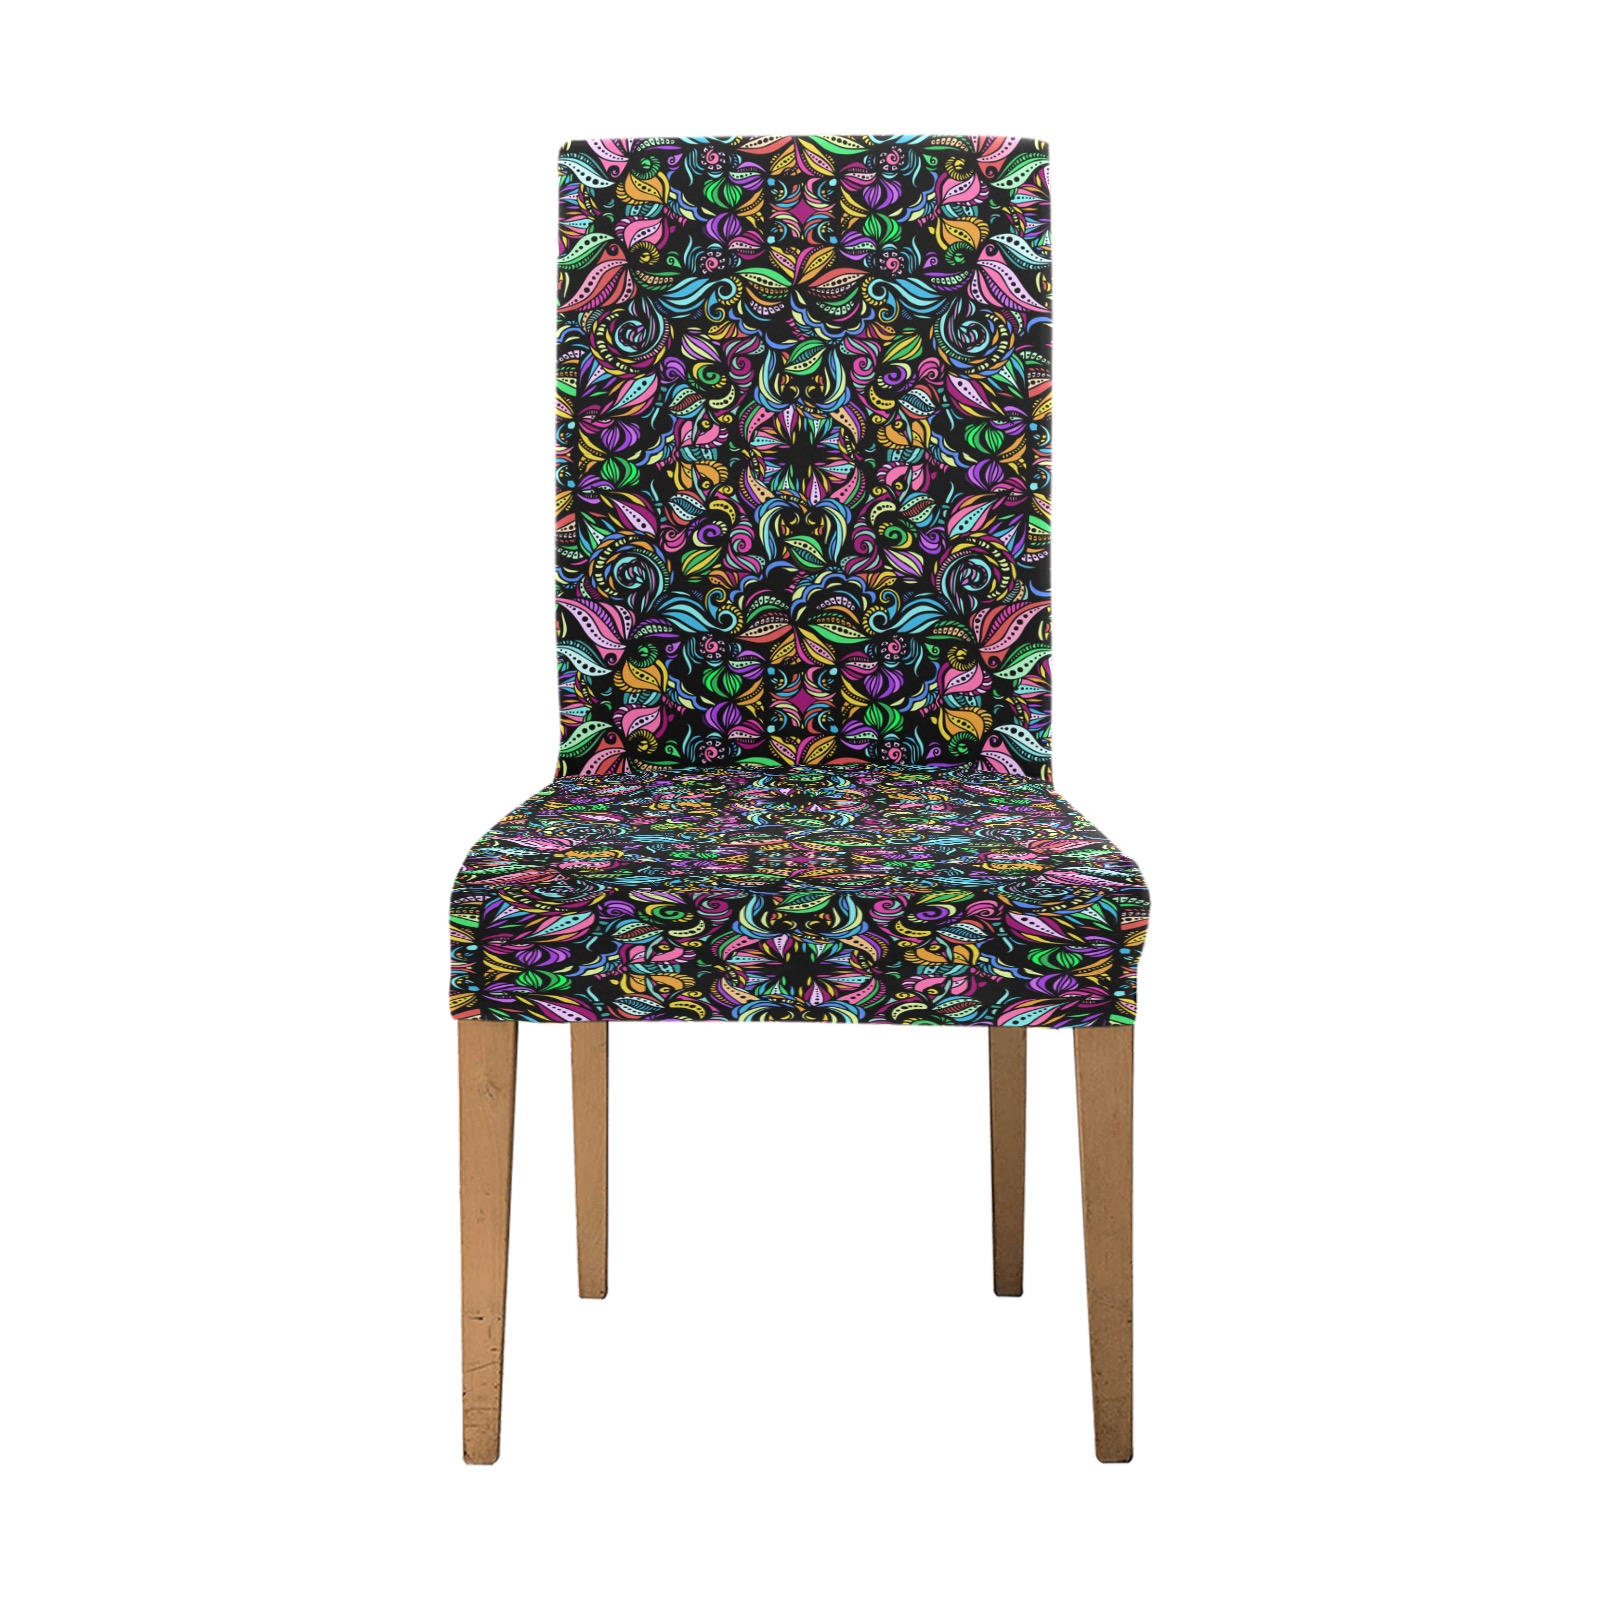 Whimsical Blooms Removable Dining Chair Cover